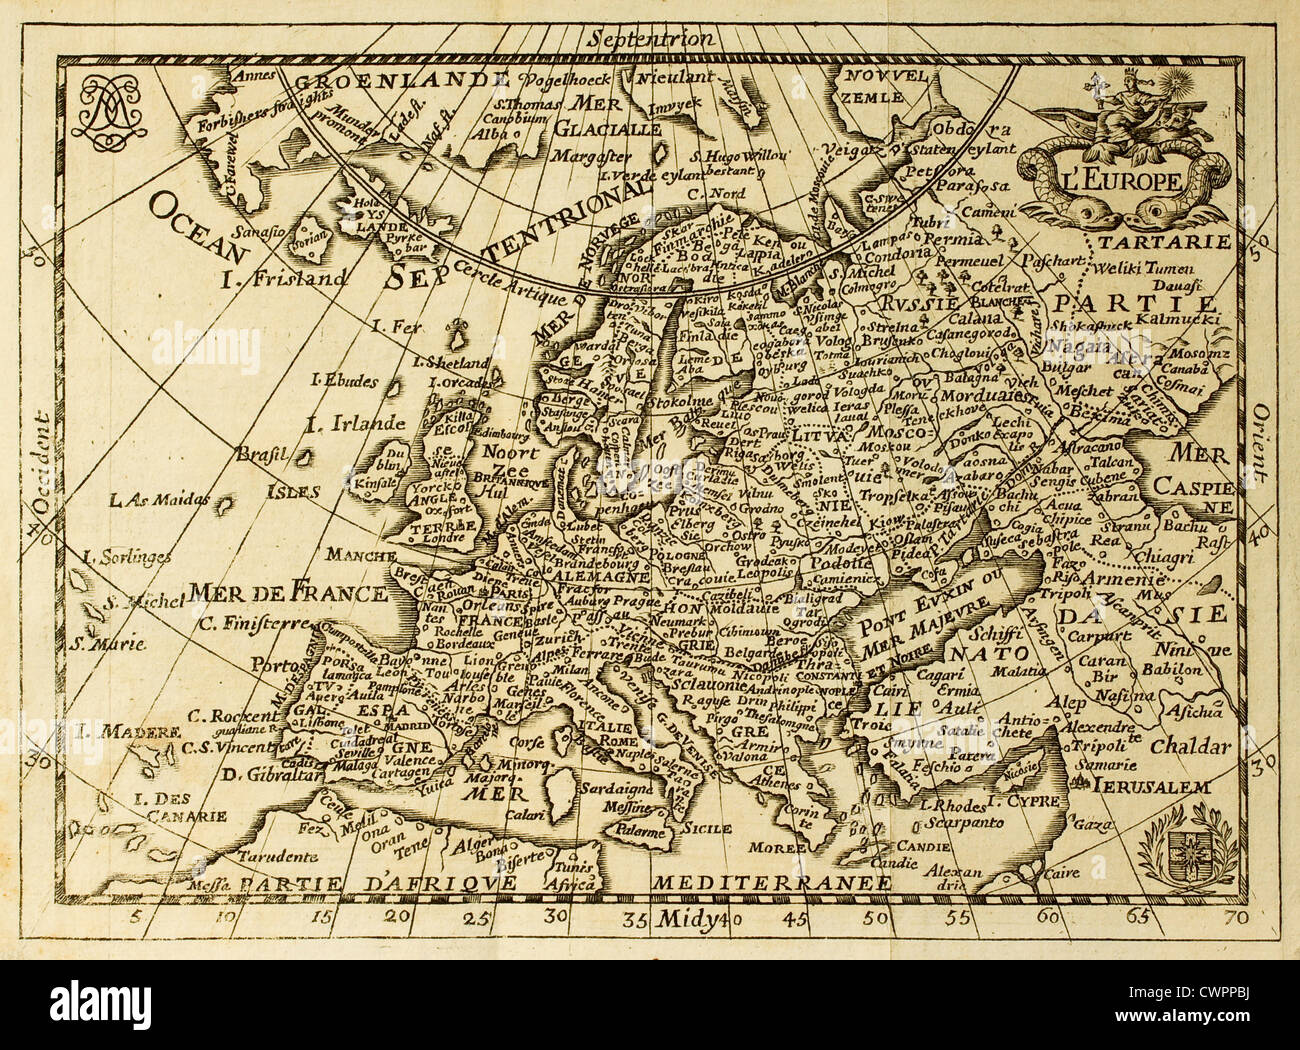 Old map of Europe Stock Photo